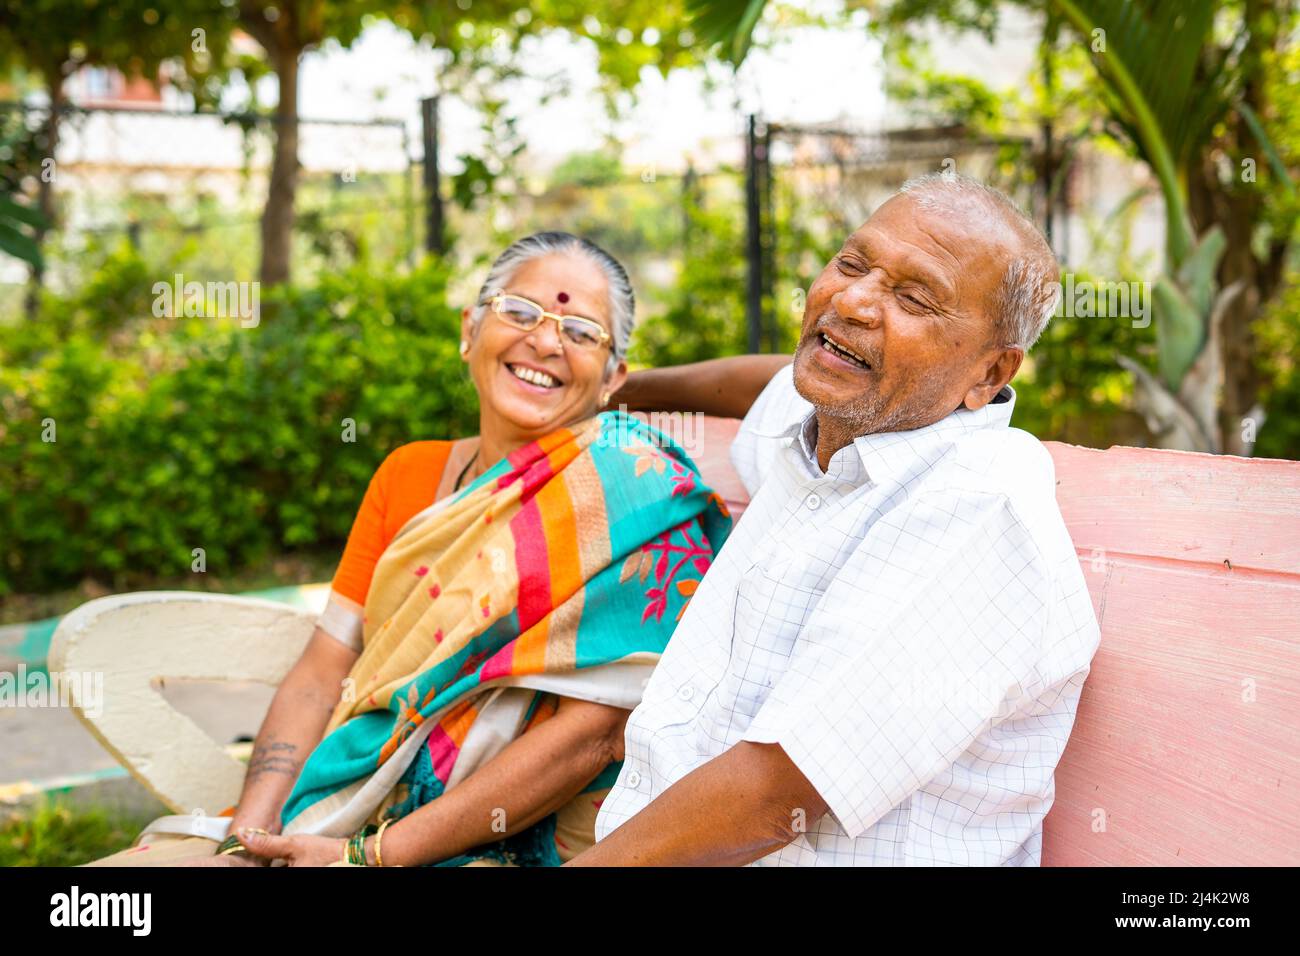 laughing Senior couple while talking with each other at park - concept of friendship, enjoyment and relaxation Stock Photo